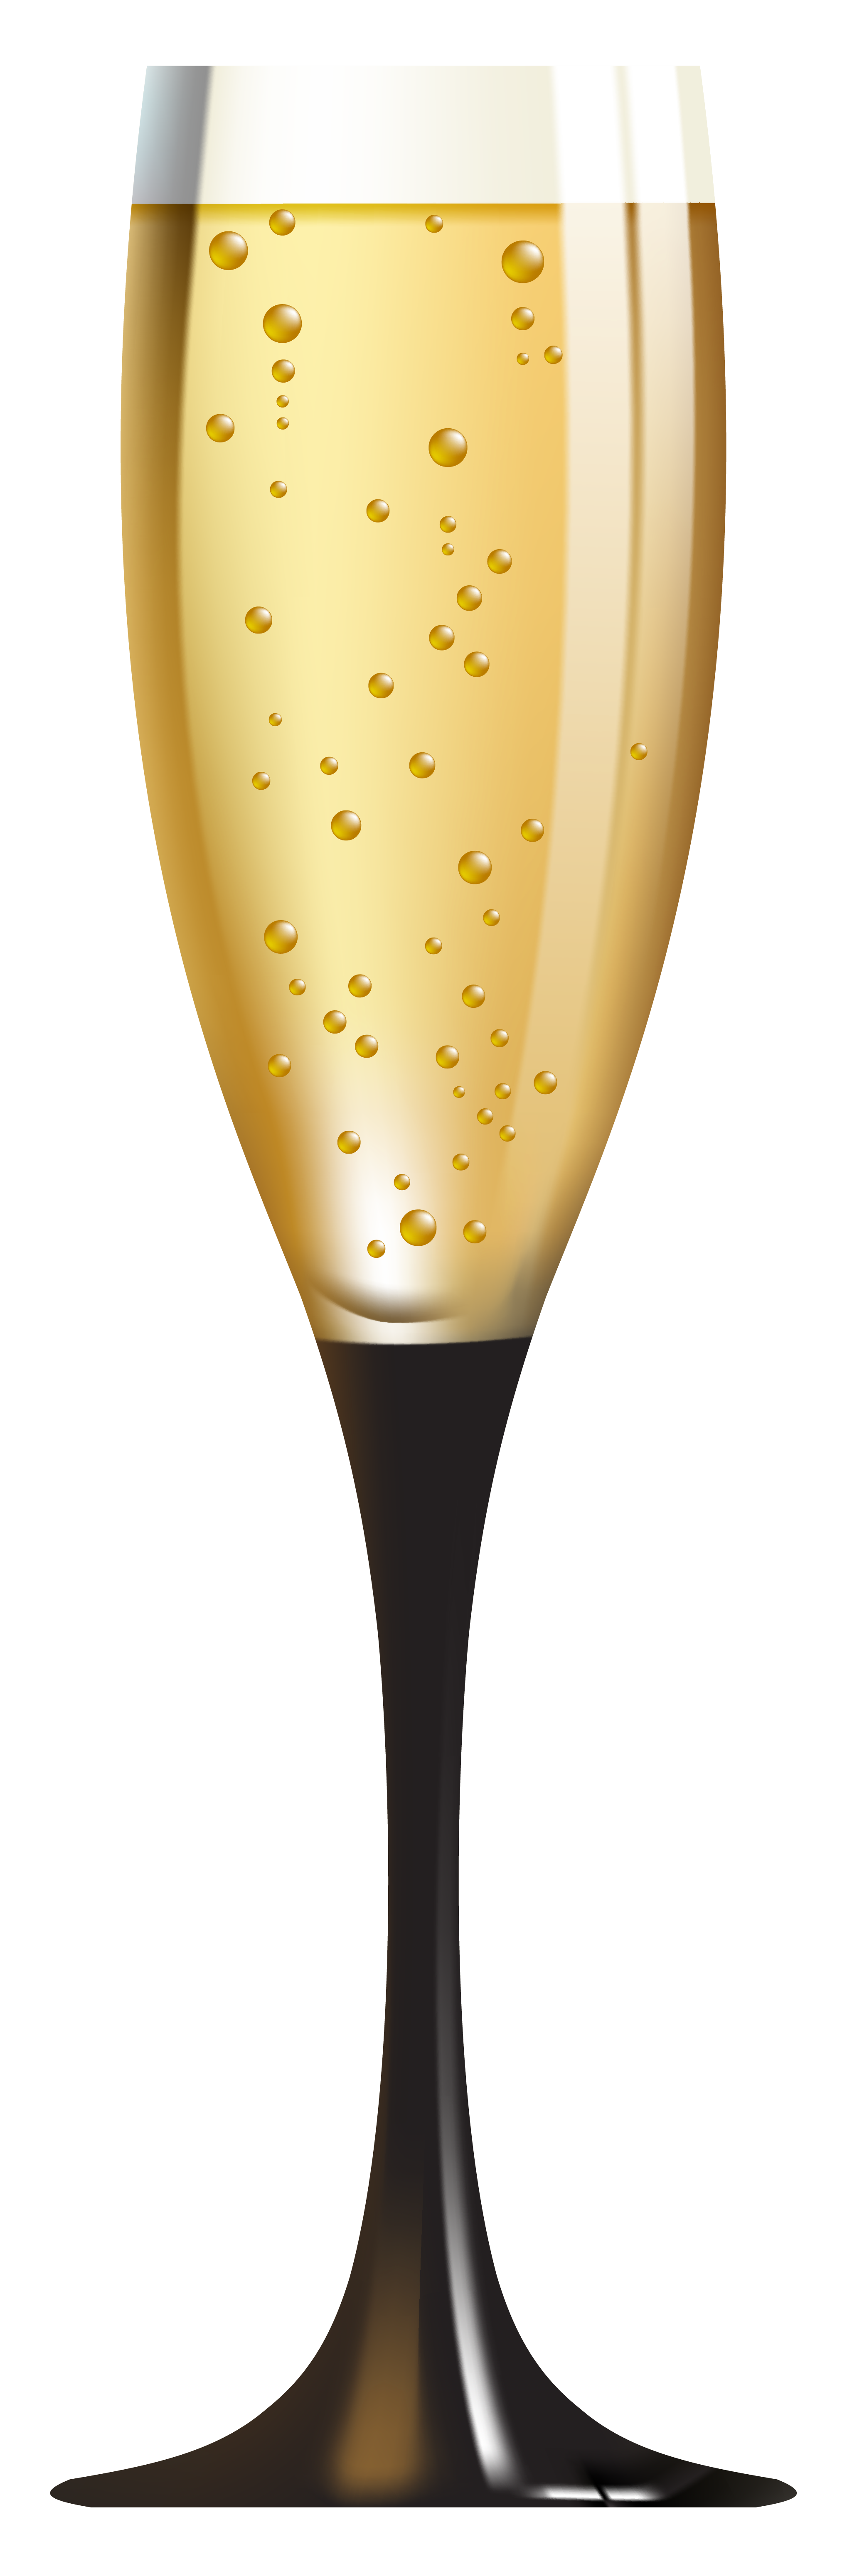 Champagne Glass Clipart & Champagne Glass Clip Art Images.